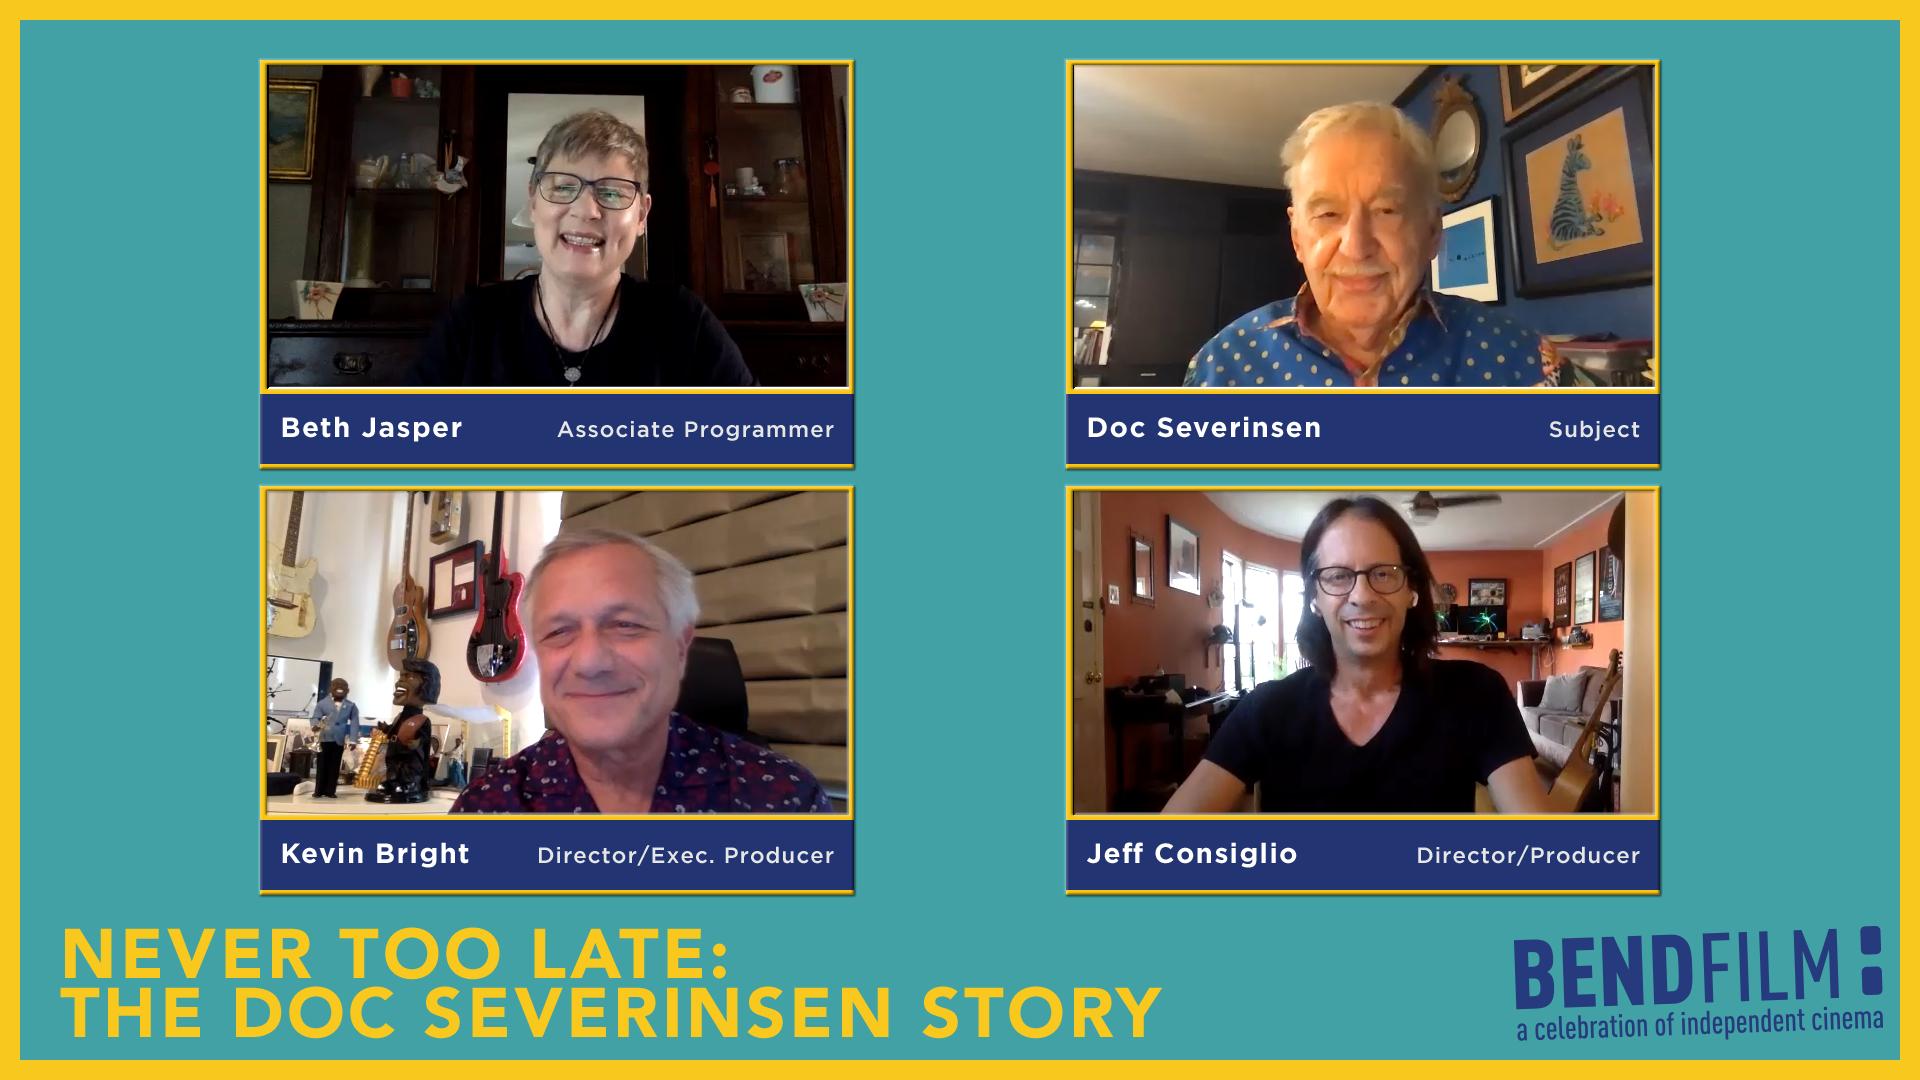 Q&A | NEVER TOO LATE: THE DOC SEVERINSEN STORY